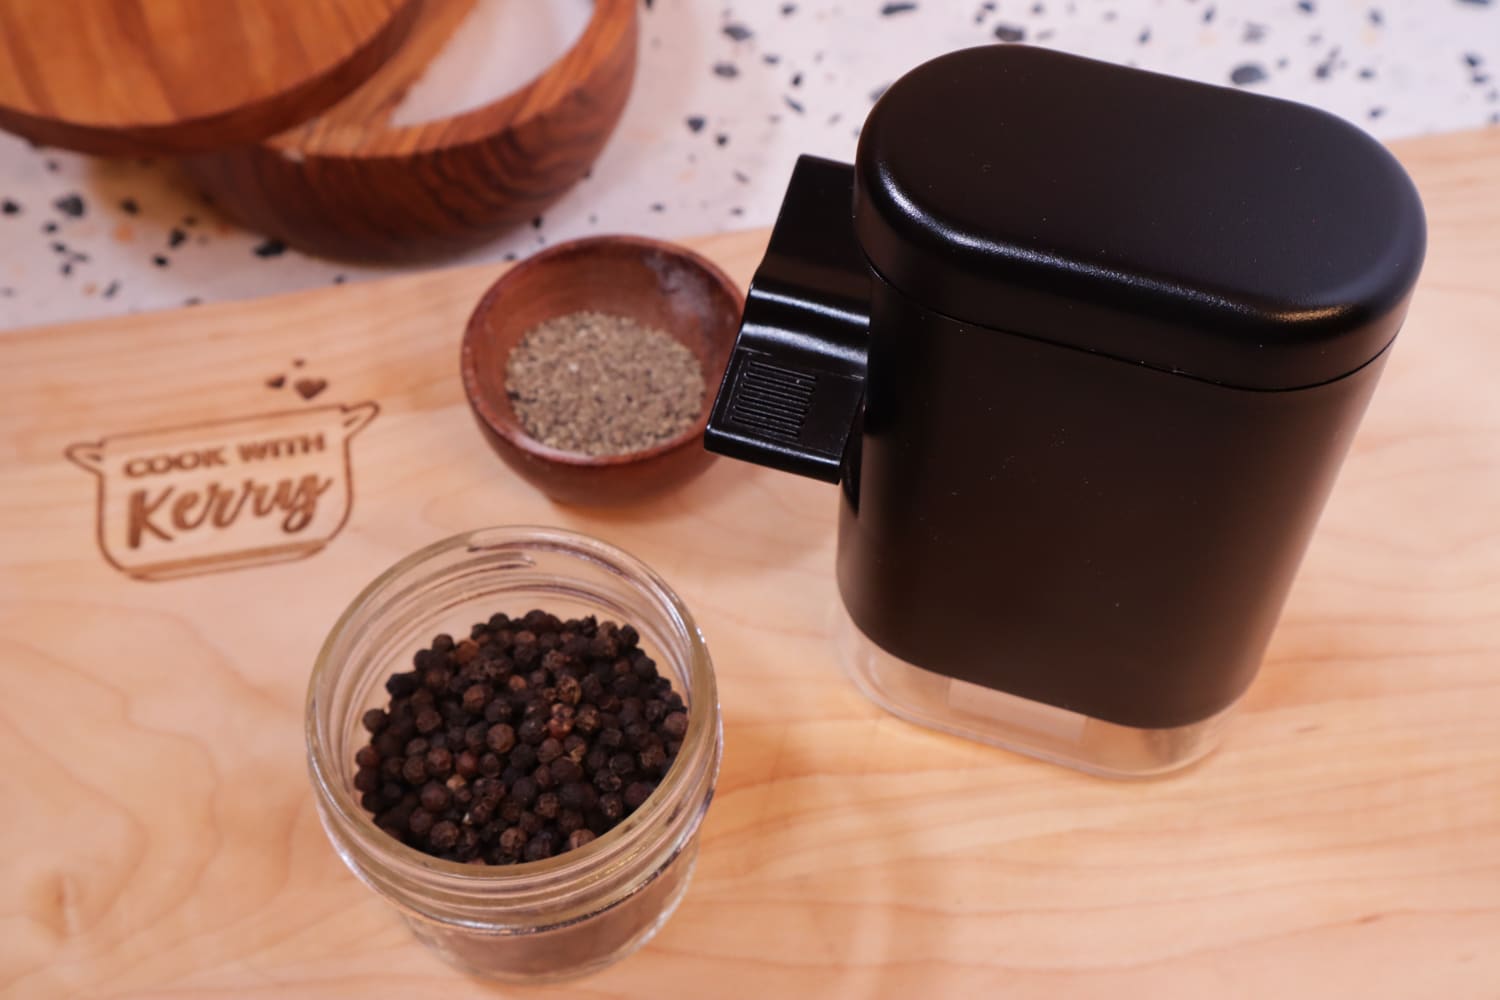 https://www.cookwithkerry.com/wp-content/uploads/2021/03/peppermate-pepper-grinder-review.jpg